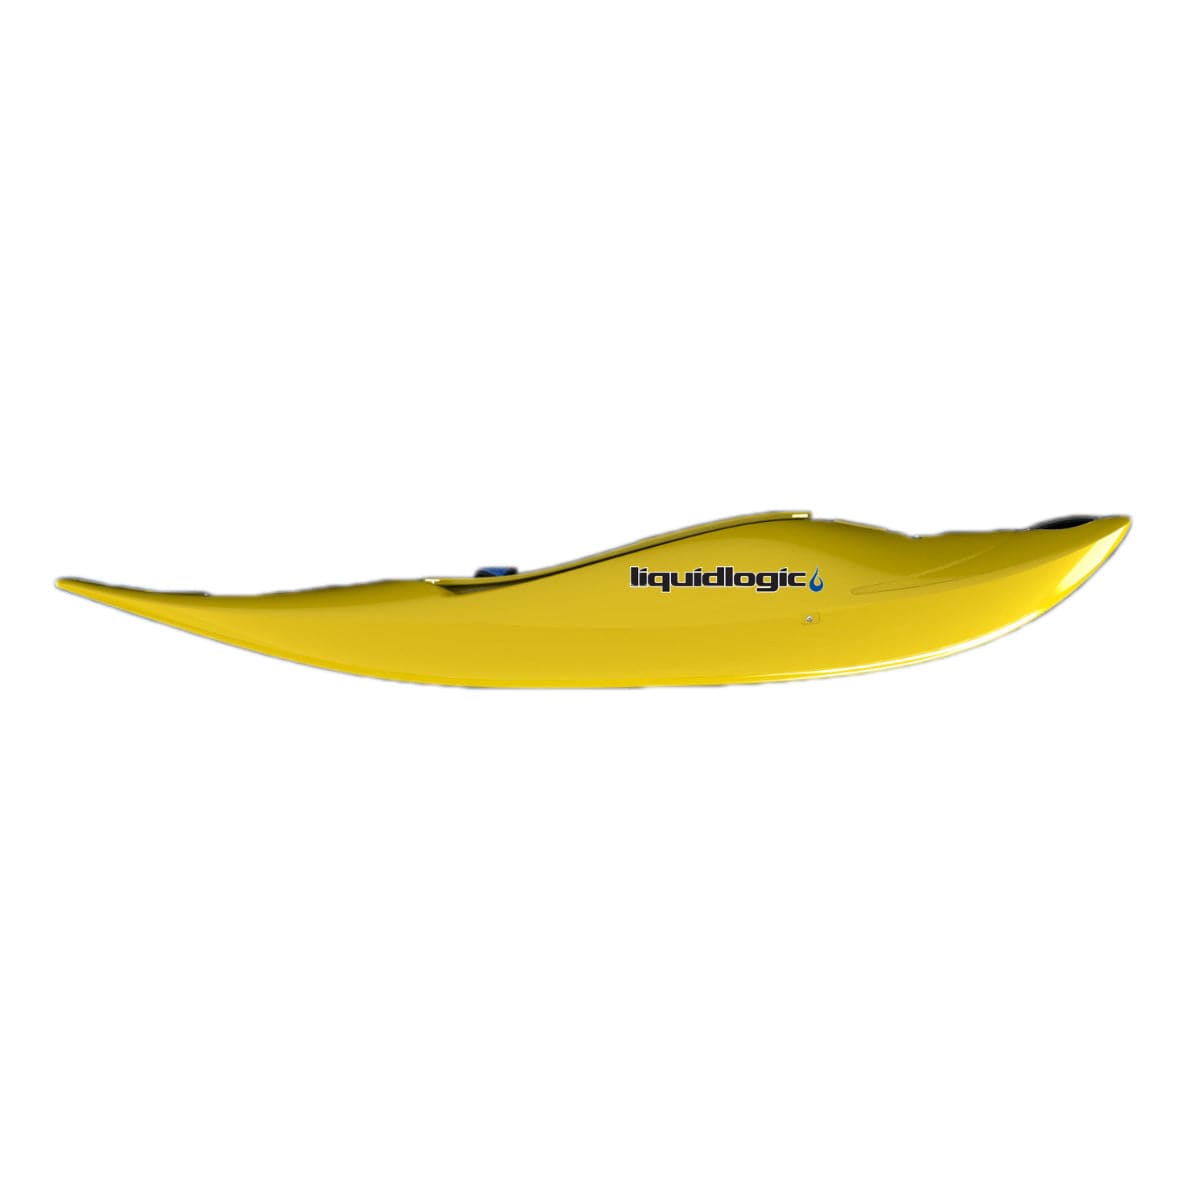 Featuring the Hot Whip new, play boat, pre-order, river runner kayak manufactured by LiquidLogic shown here from a second angle.